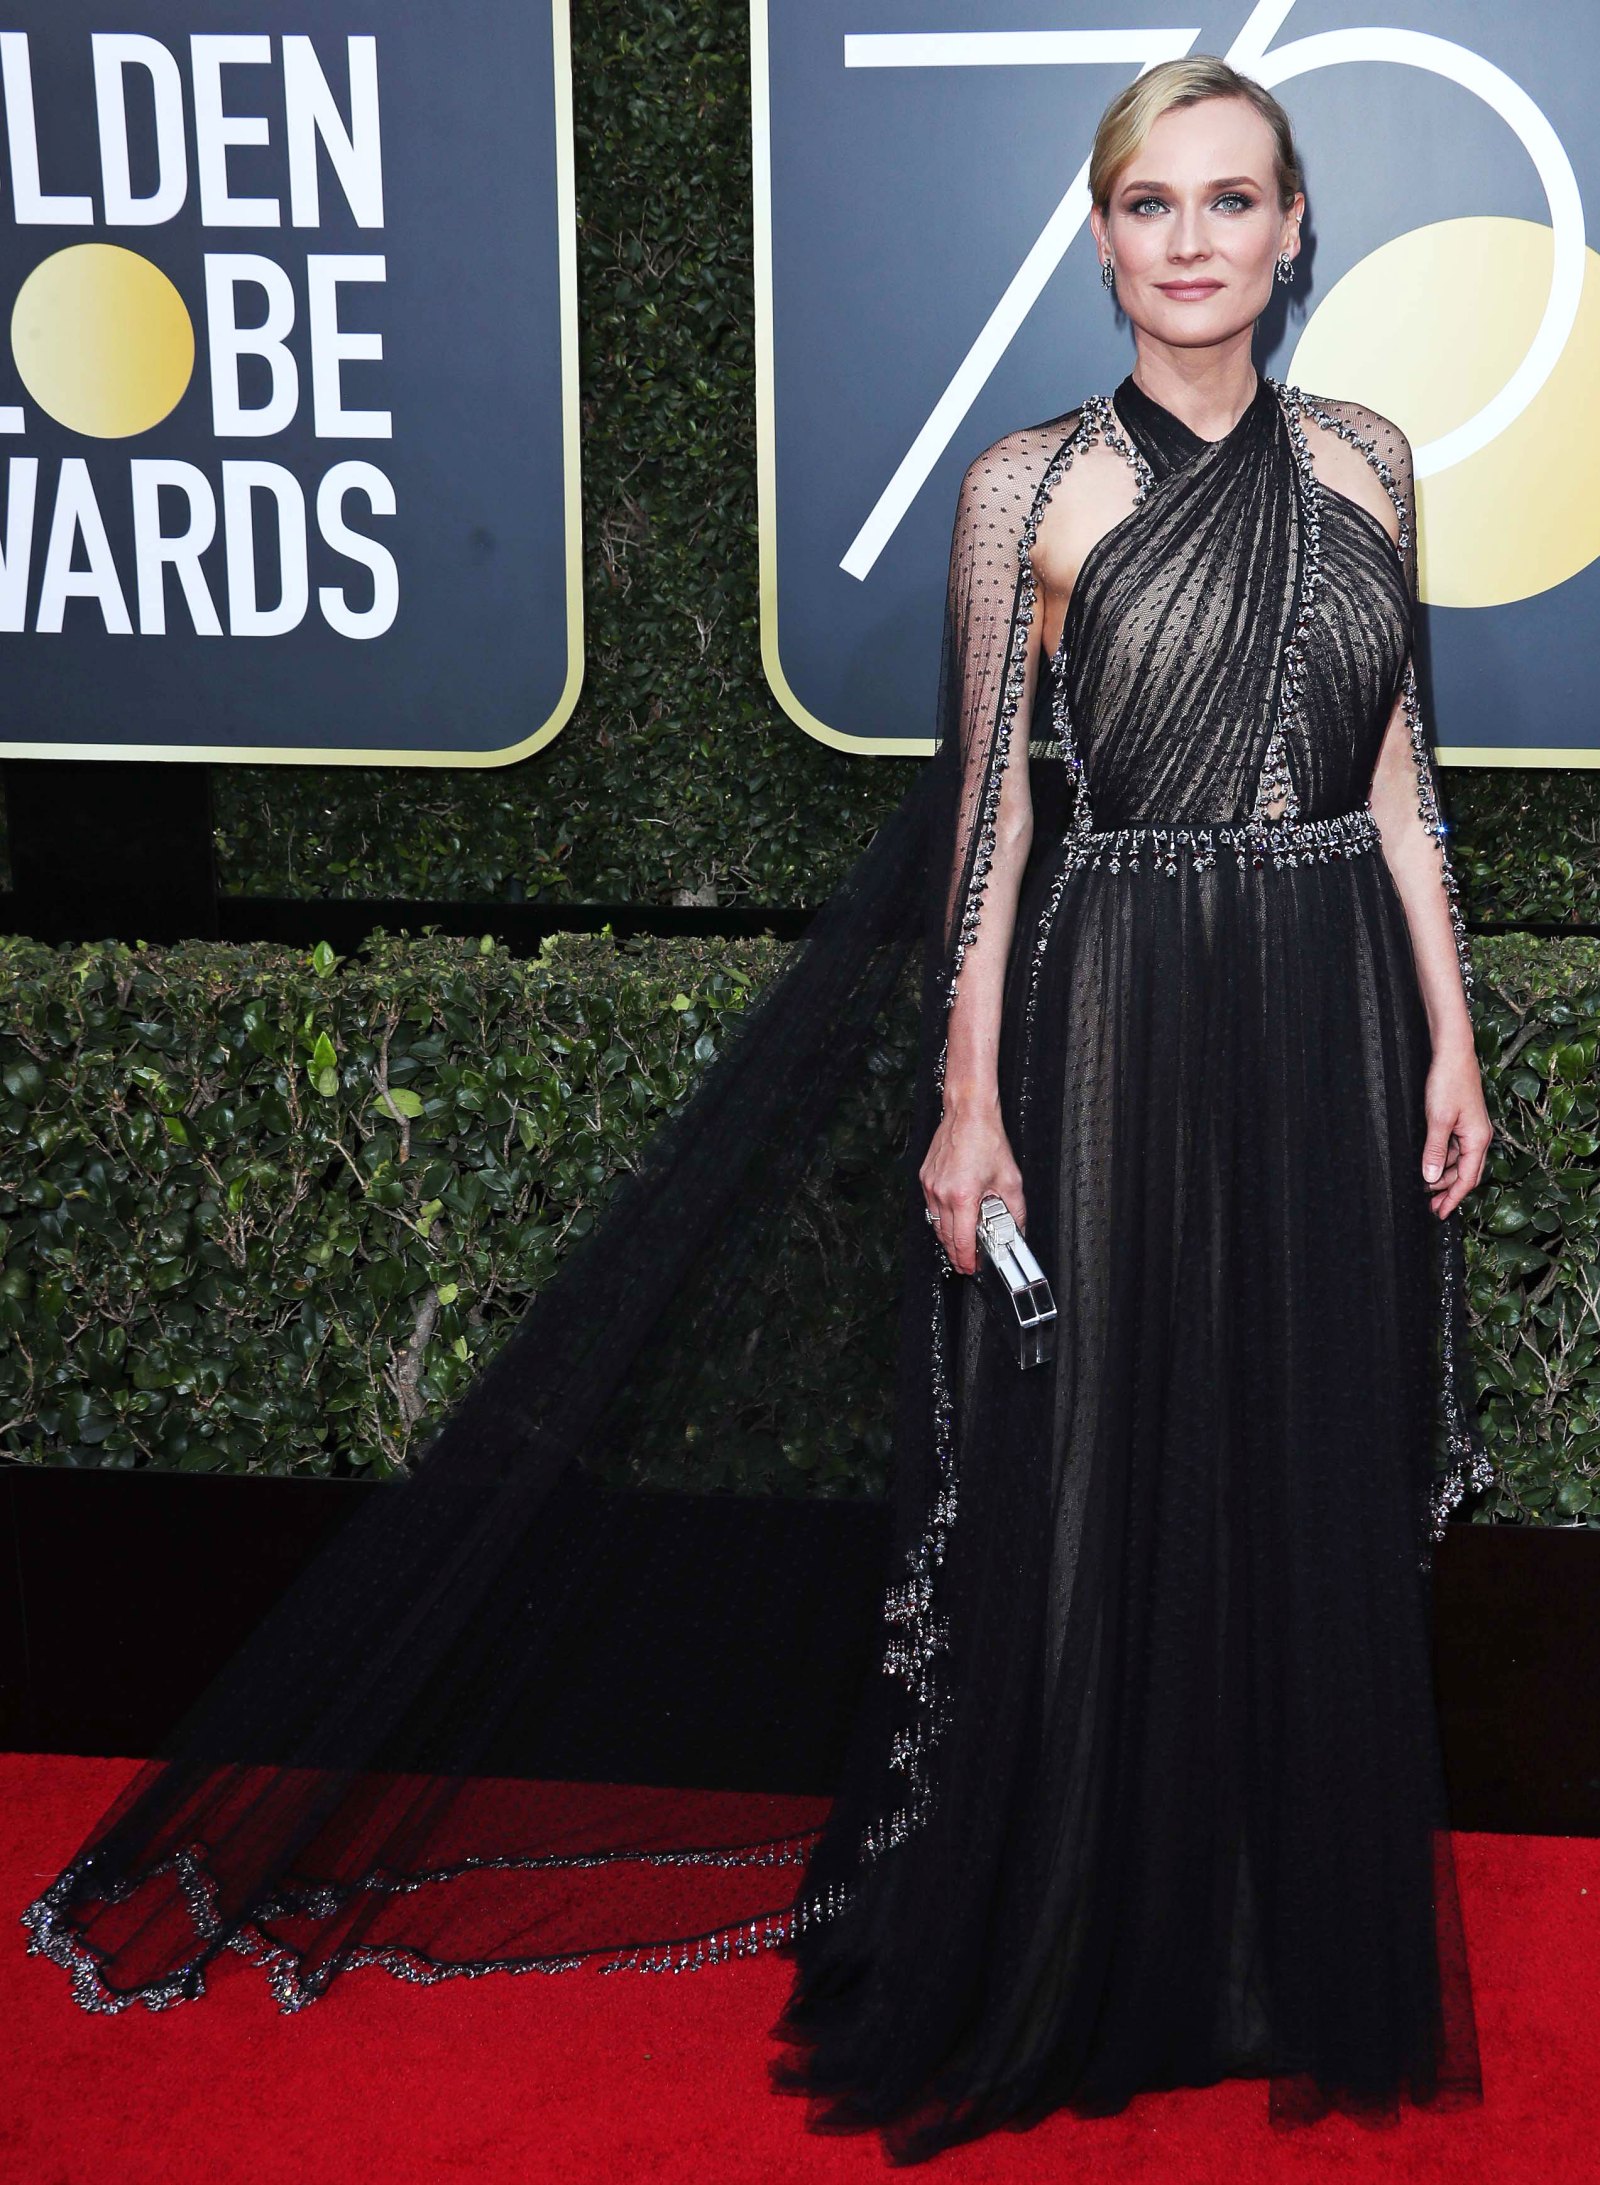 Golden Globes: See the Best Dresses Through the Years